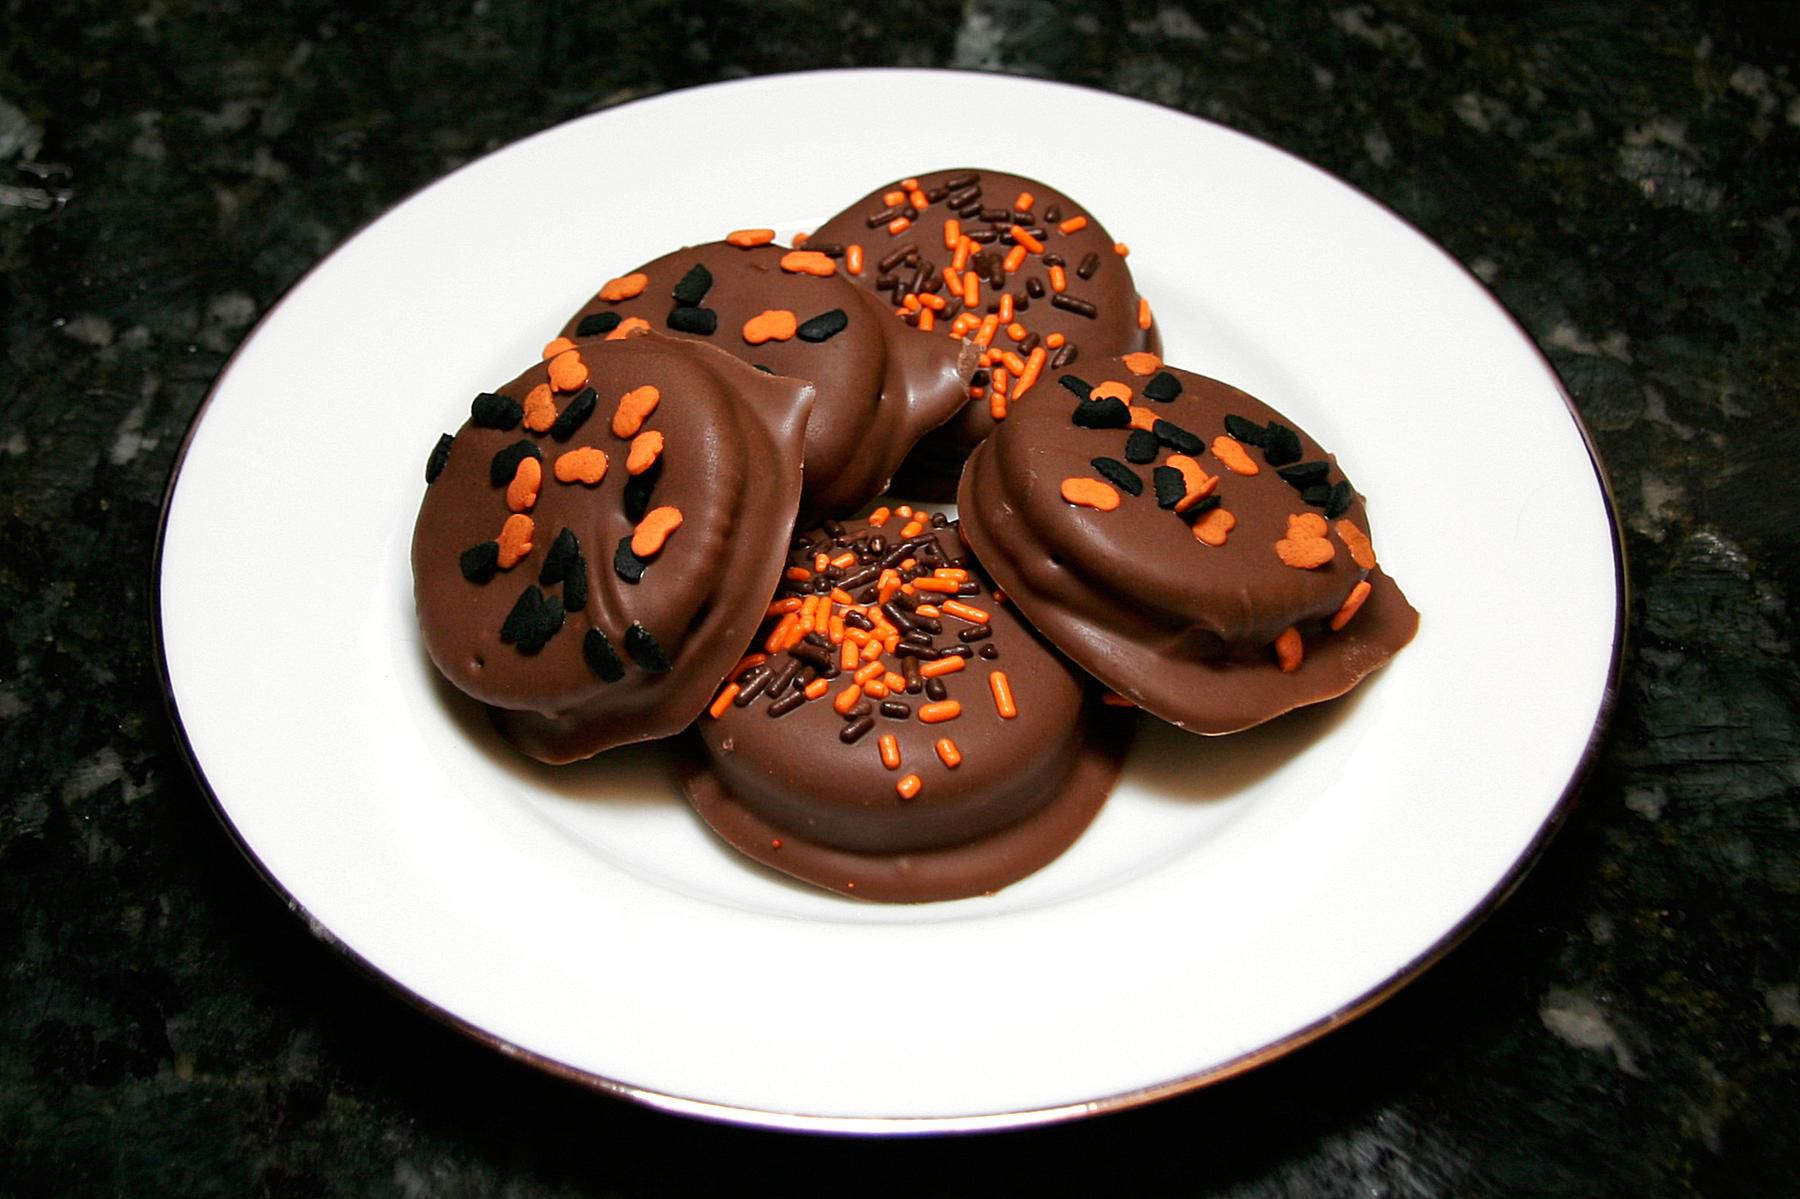 ritz crackers with peanut butter dipped in chocolate